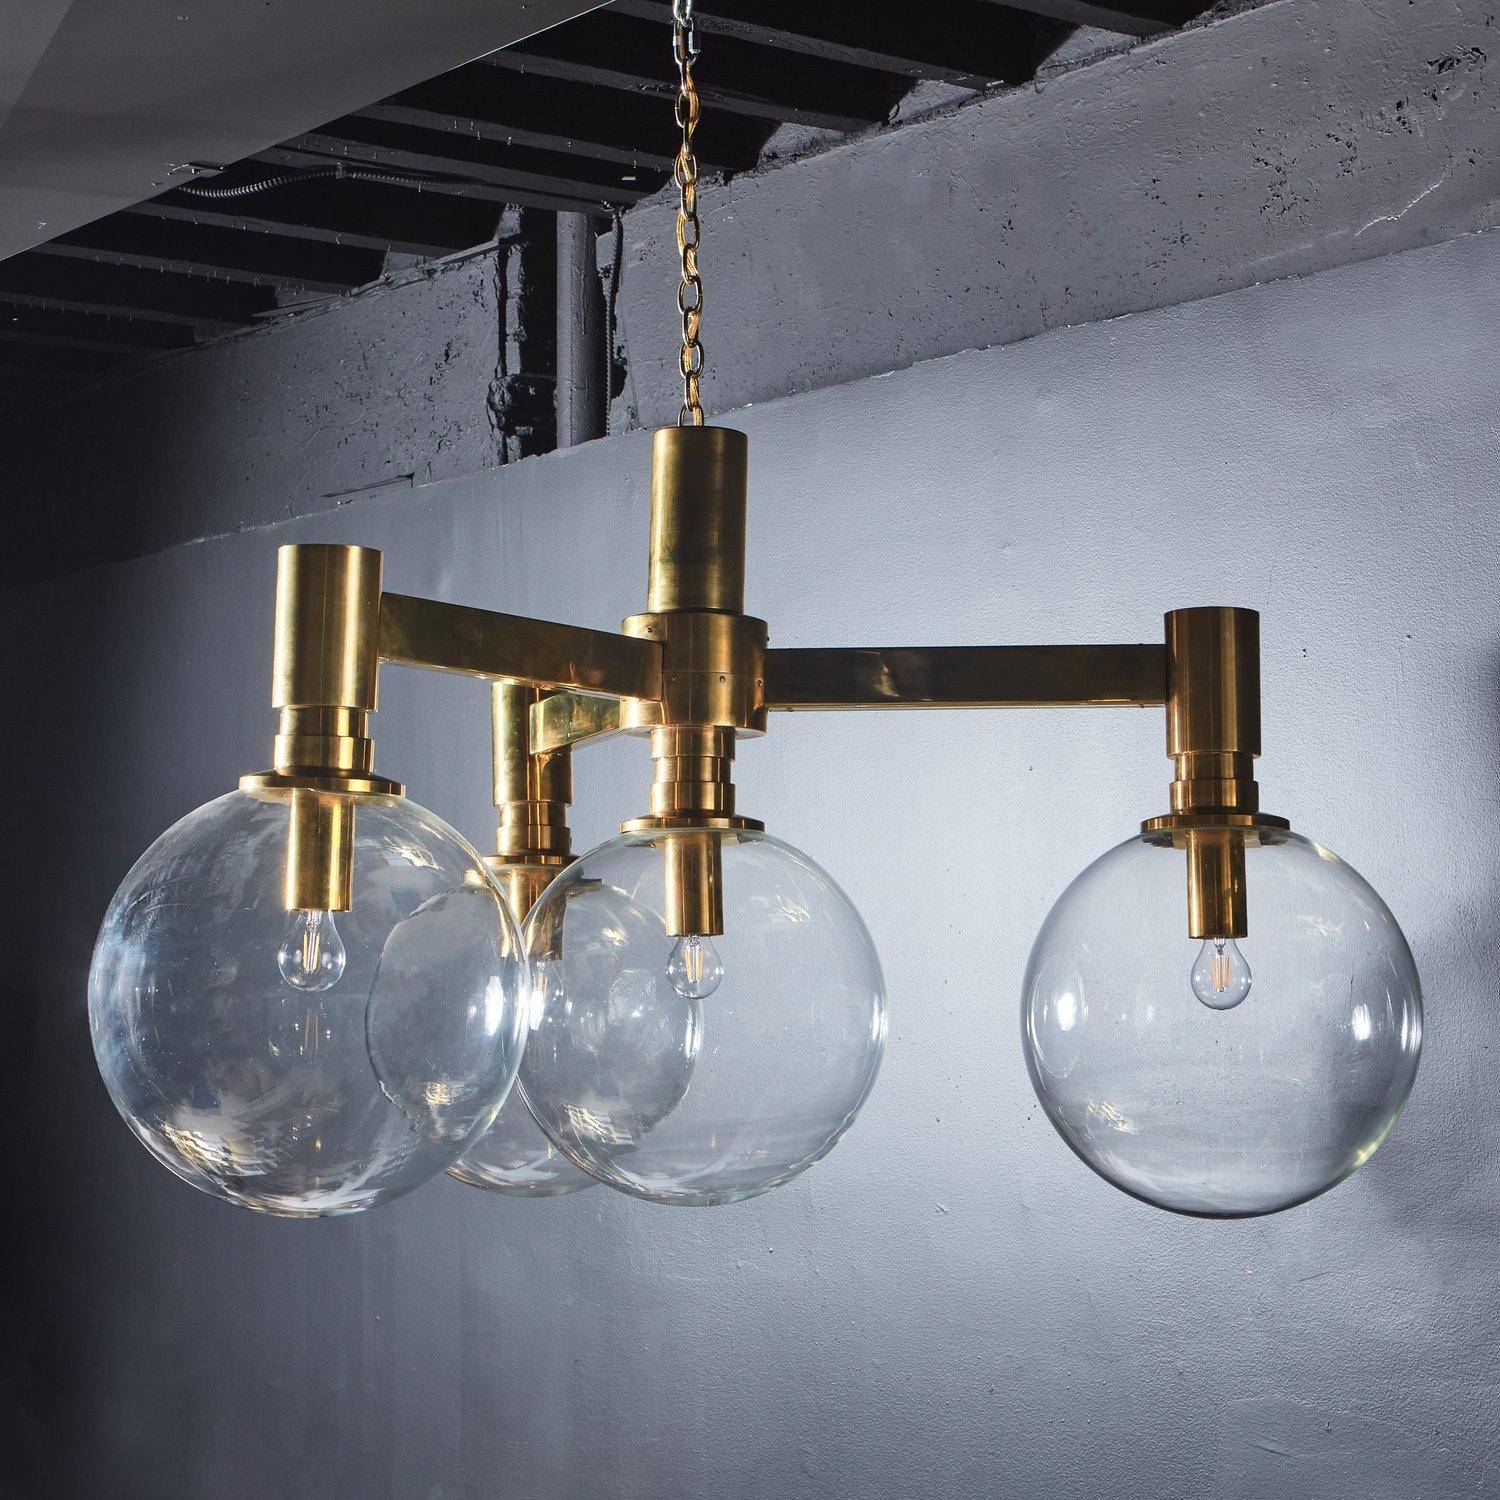 A beautiful vintage 1960s Austrian chandelier featuring an elegant polished brass frame with three angular arms. This fixture has four oversized hand blown spherical shades, creating a dramatic contrast to the monumental frame. 

Fixture Measures